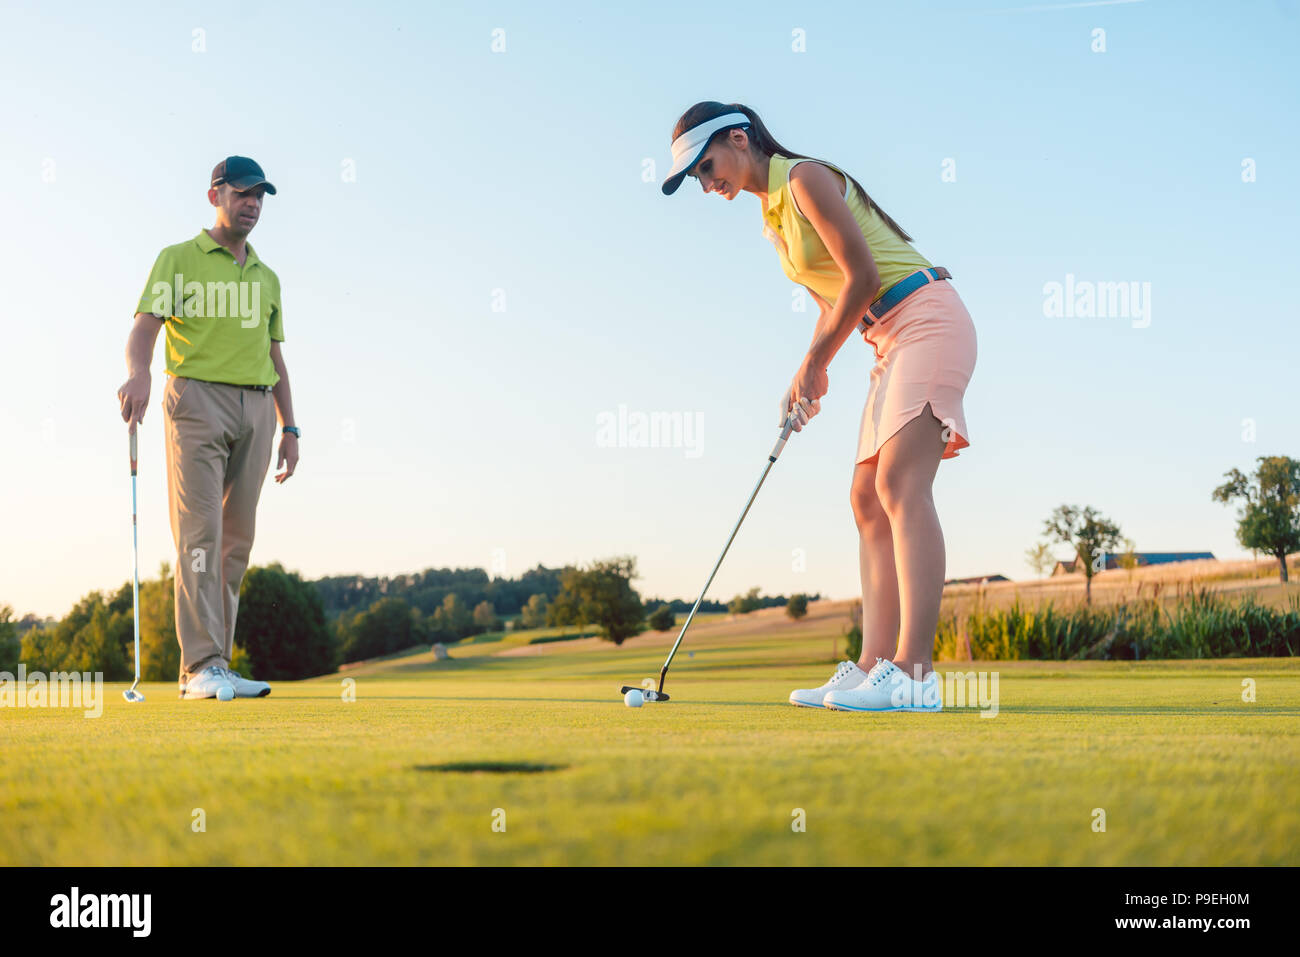 Full length of a woman playing professional golf with her male partner Stock Photo